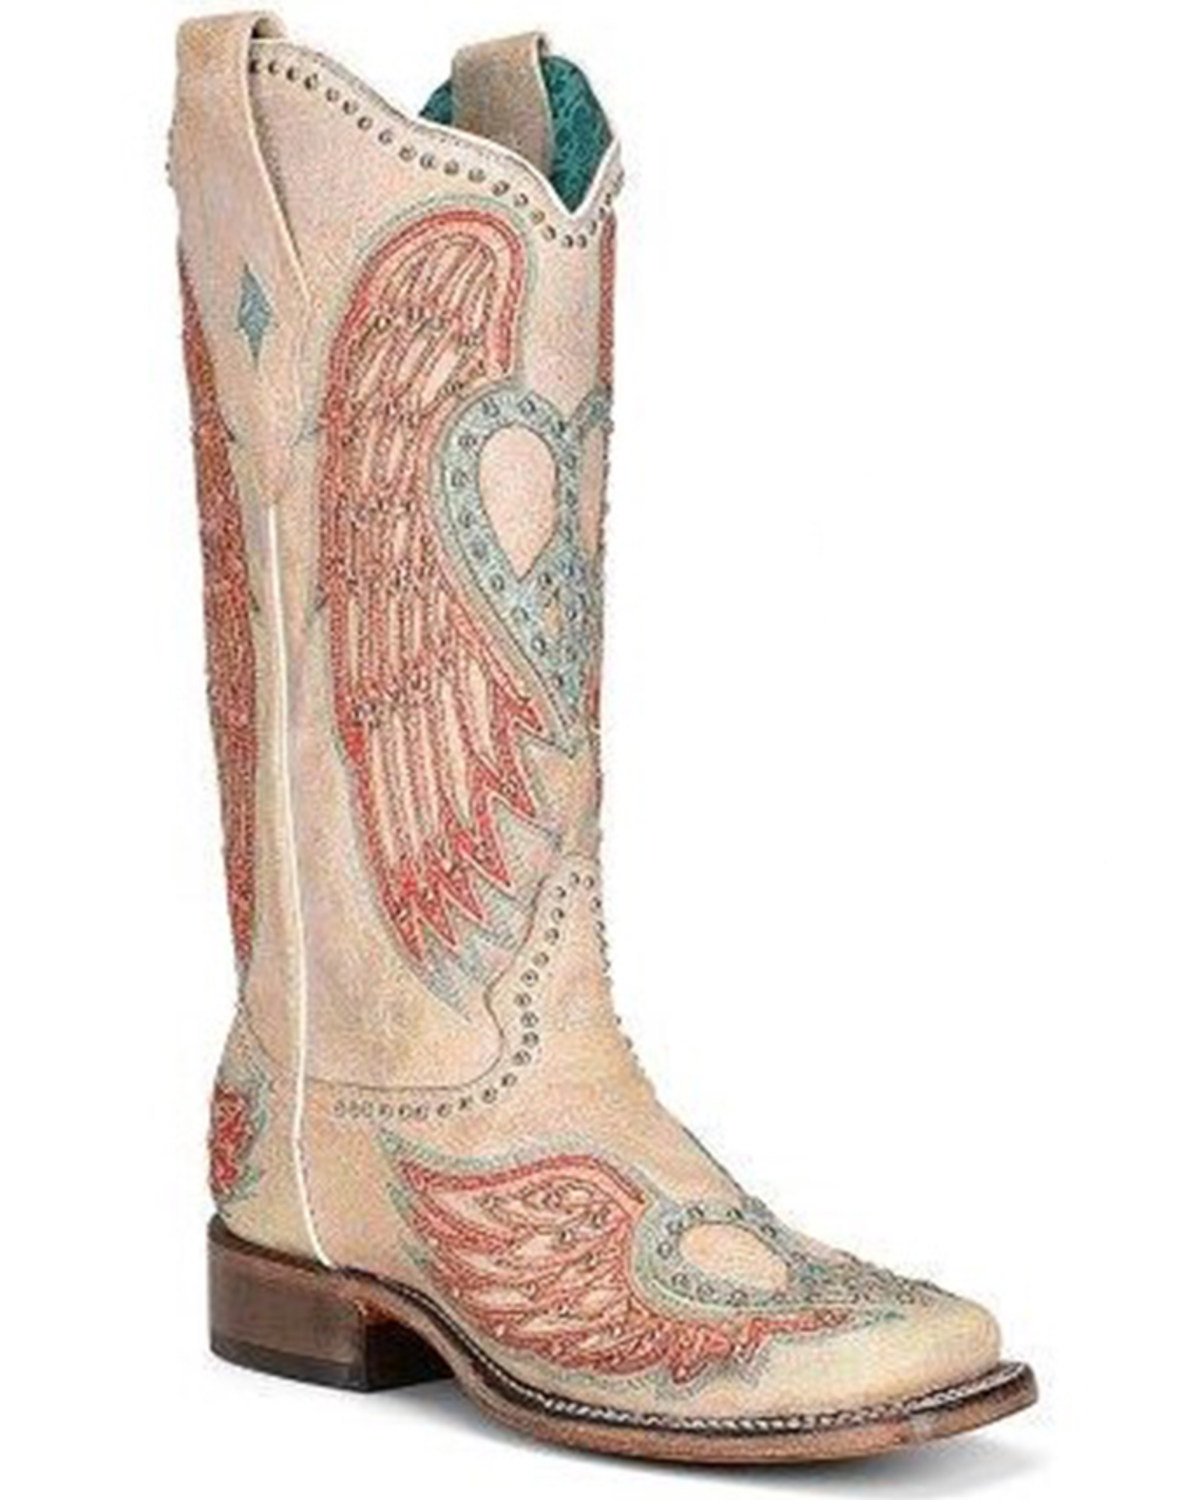 Corral Women's Heart & Wing Western Boots - Square Toe